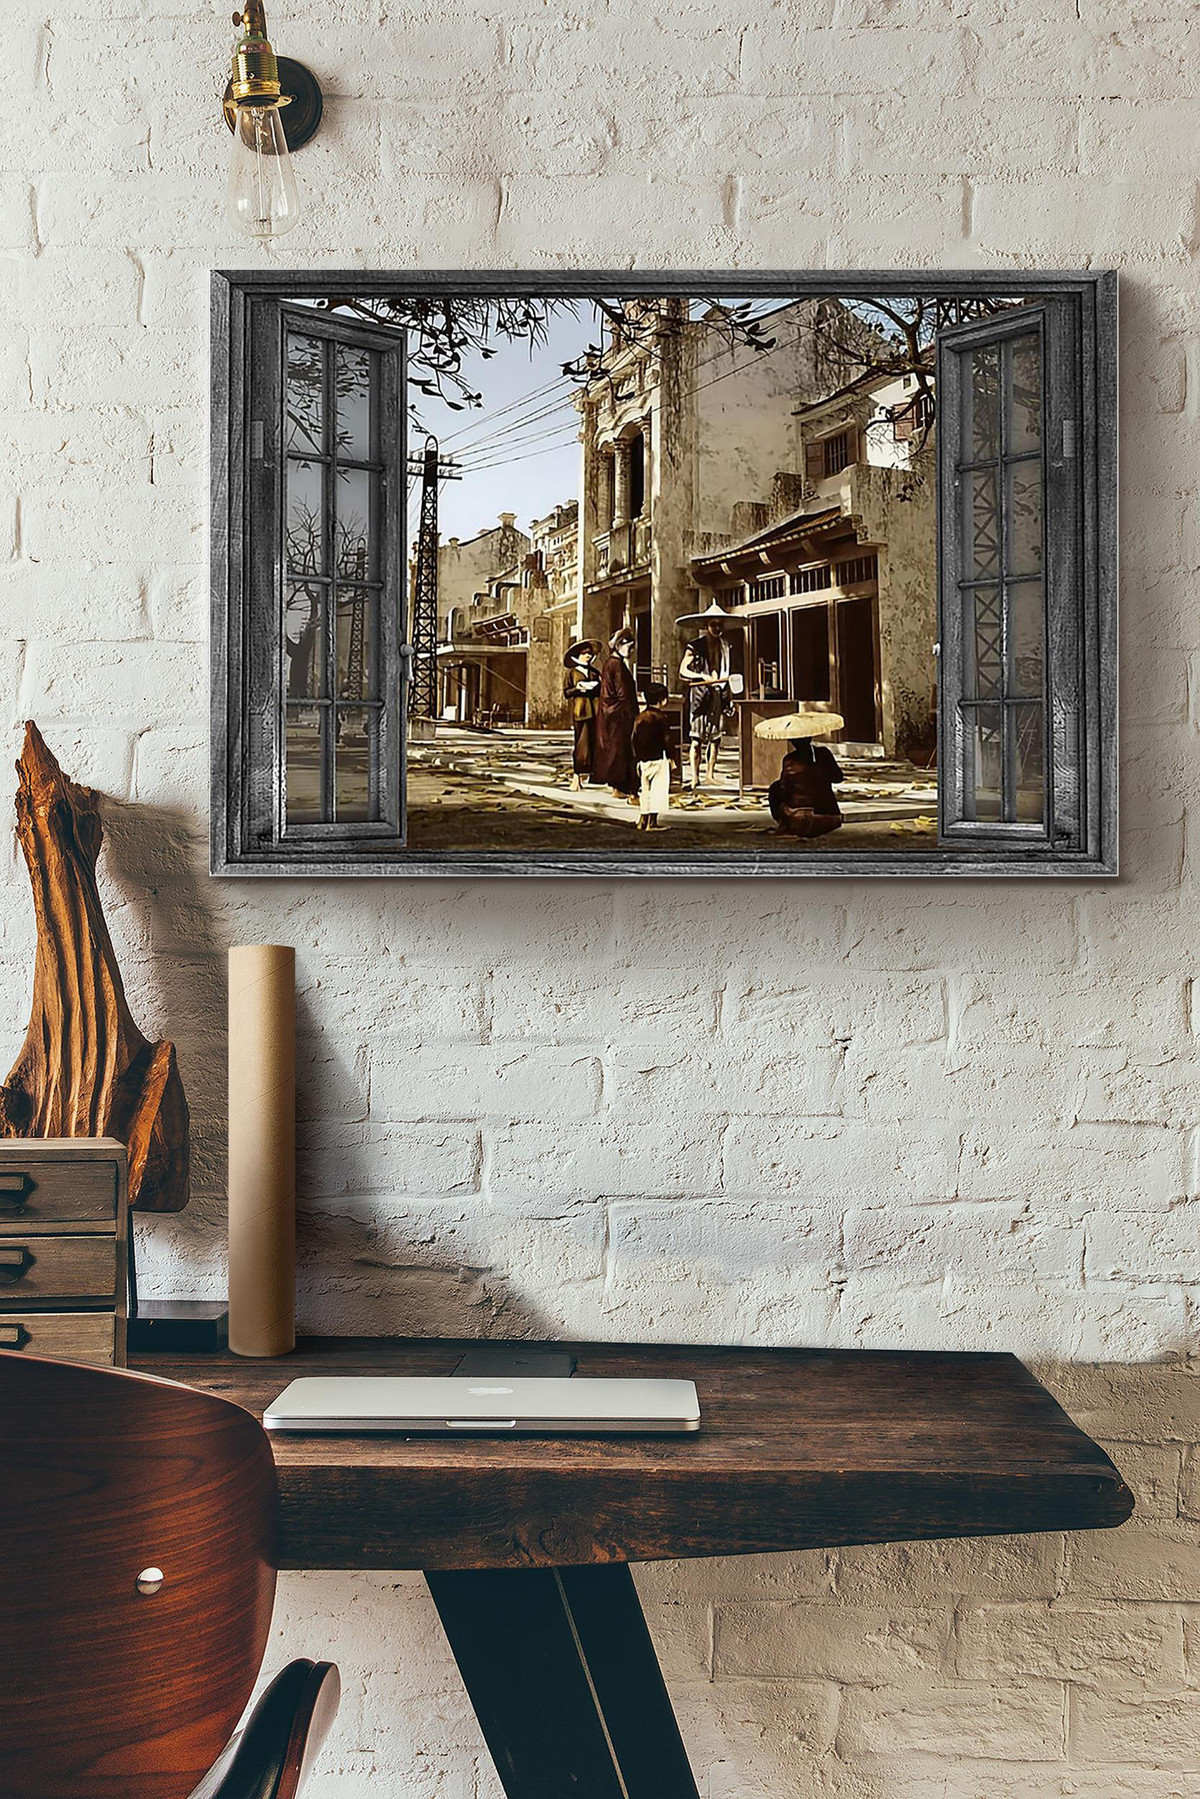 Vietnam Old Town Vintage 3D Window View Gift Idea Decor Framed Prints, Canvas Paintings Wrapped Canvas 8x10